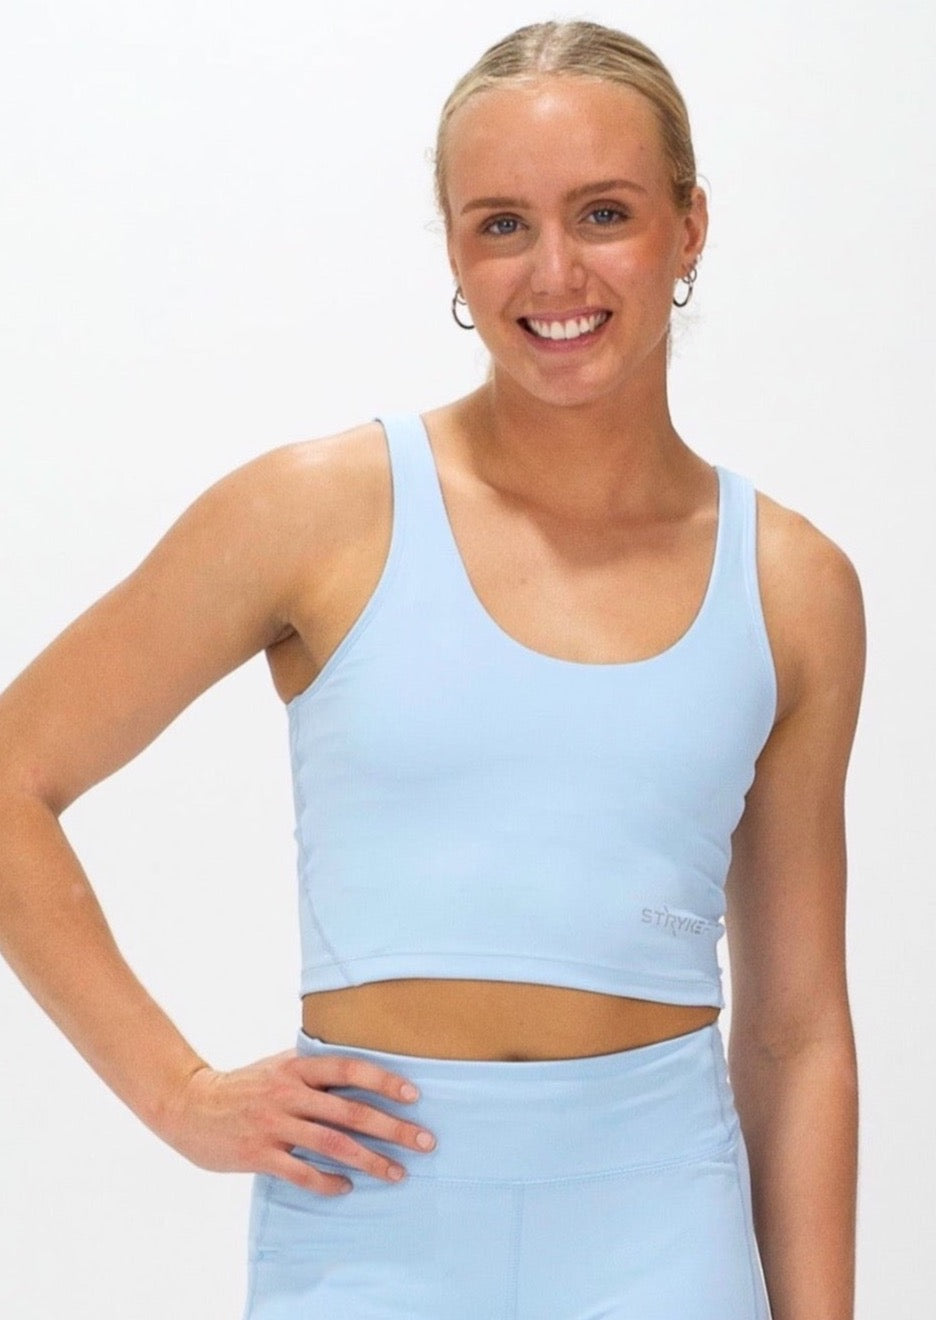 The INTERVAL CROP TOP is a longer-length crop top with a built-in bra for extra support and added coverage. Designed for high-impact training this top is a great addition to any wardrobe.